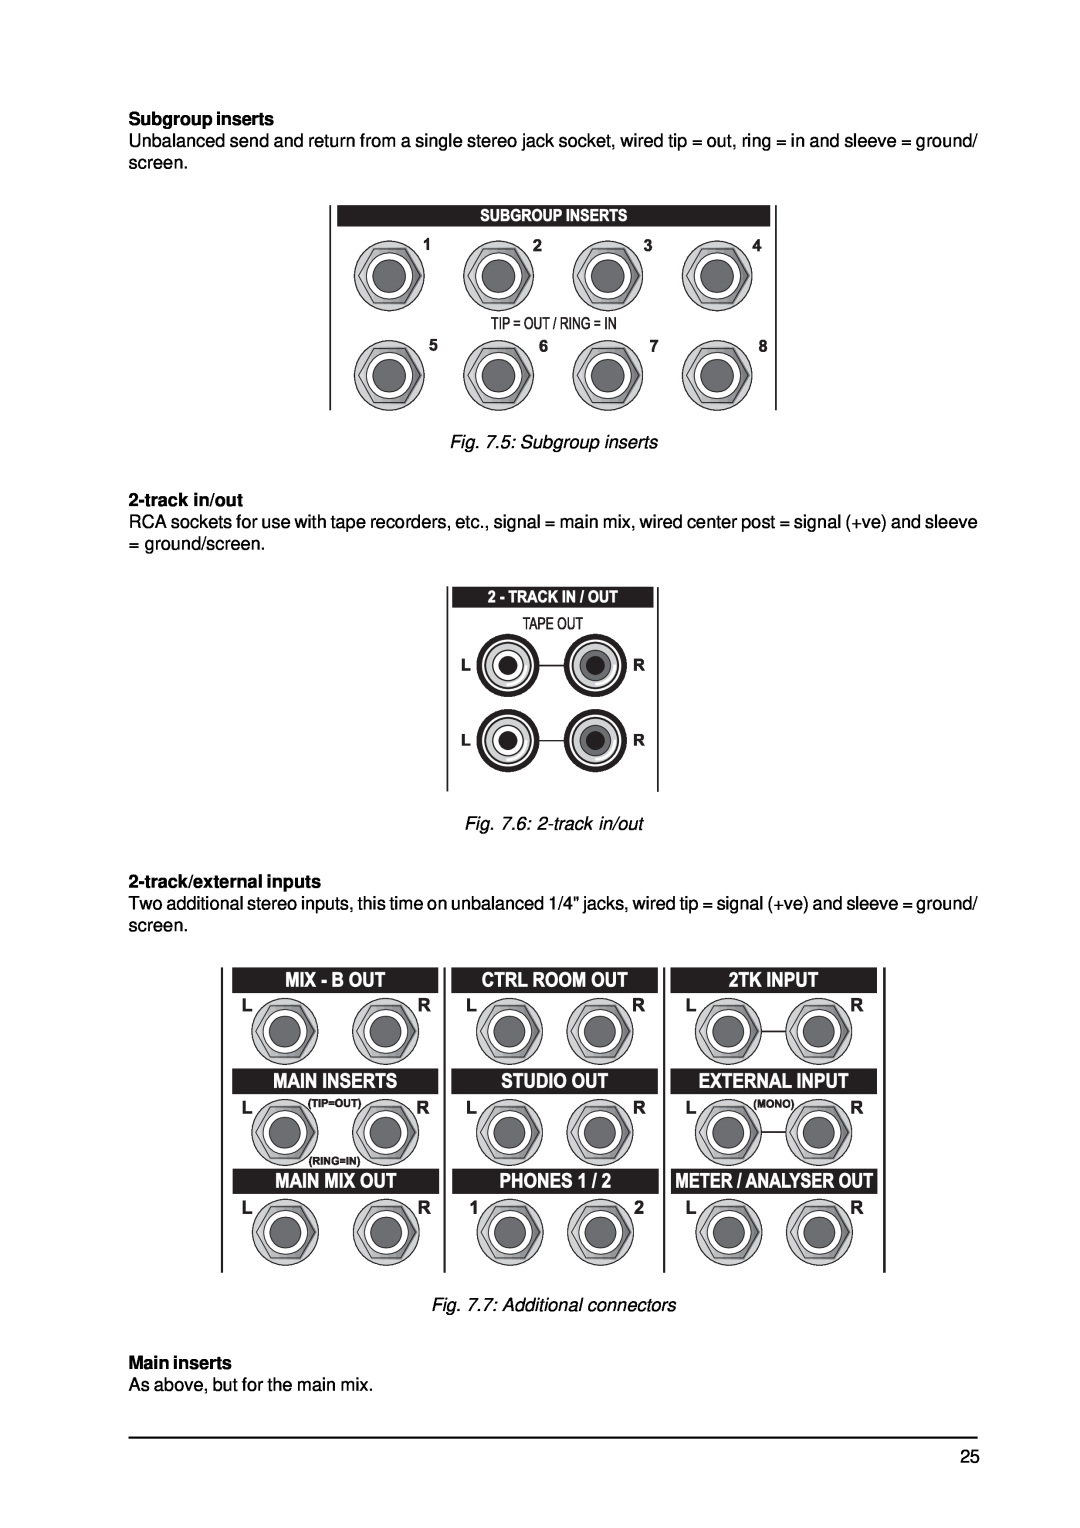 Behringer MX9000 user manual 5 Subgroup inserts, 6 2-track in/out, track/external inputs, 7 Additional connectors 